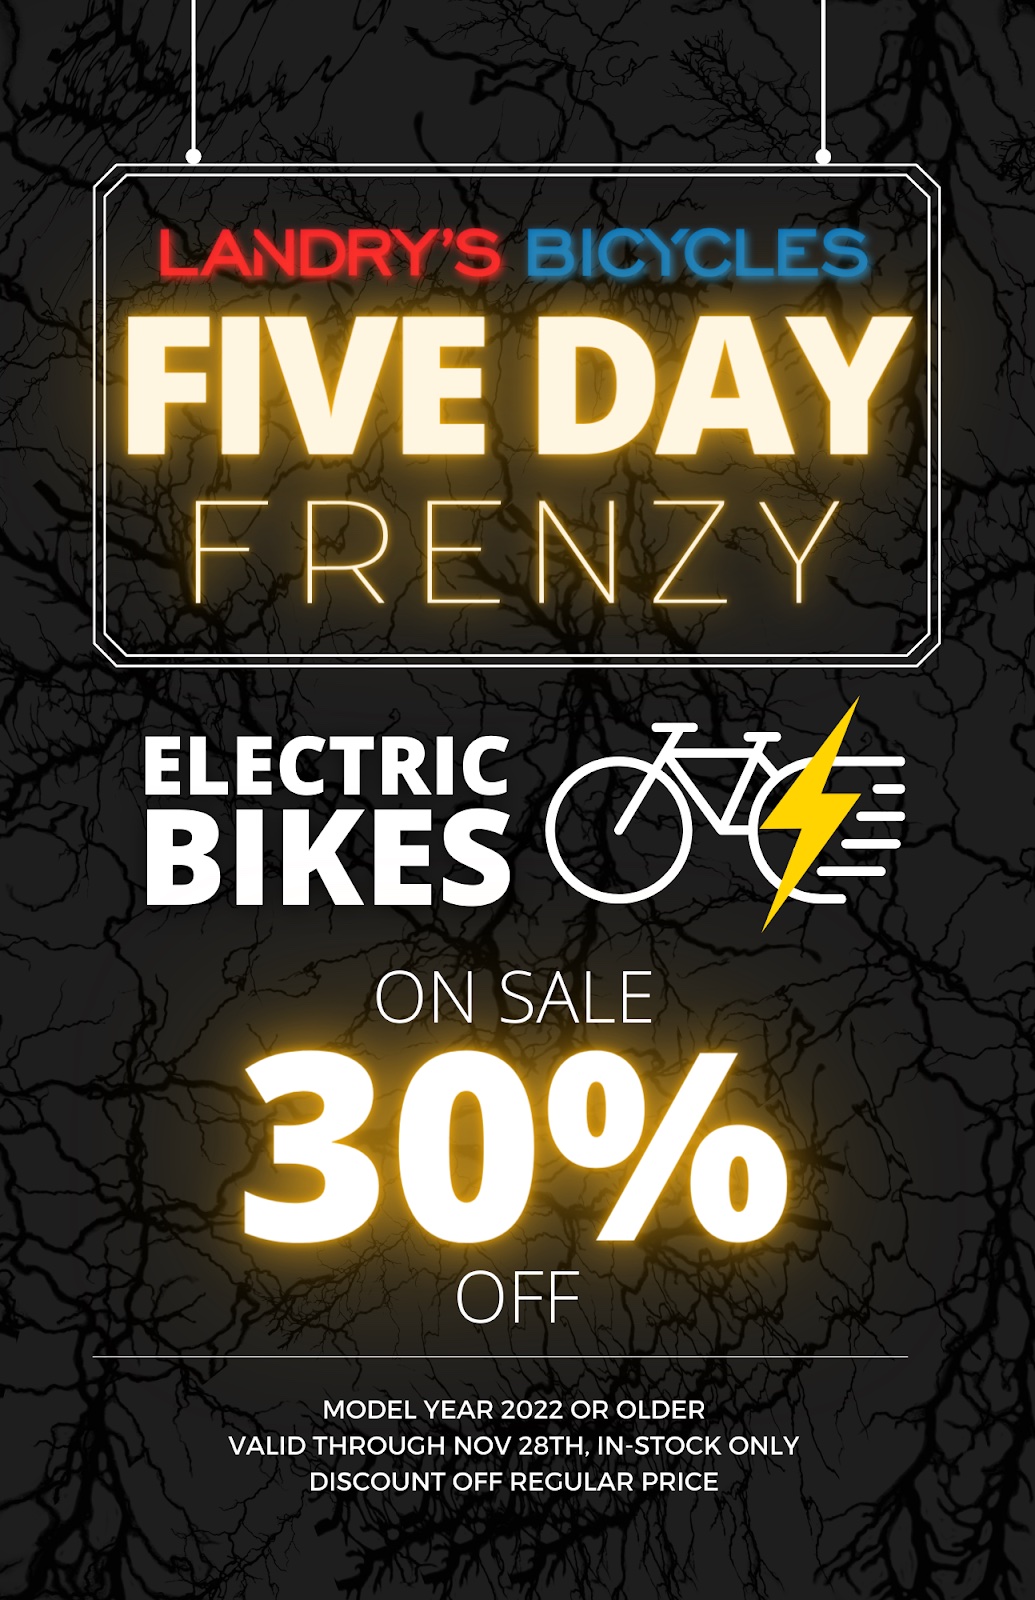 SAVE on Electric Bikes